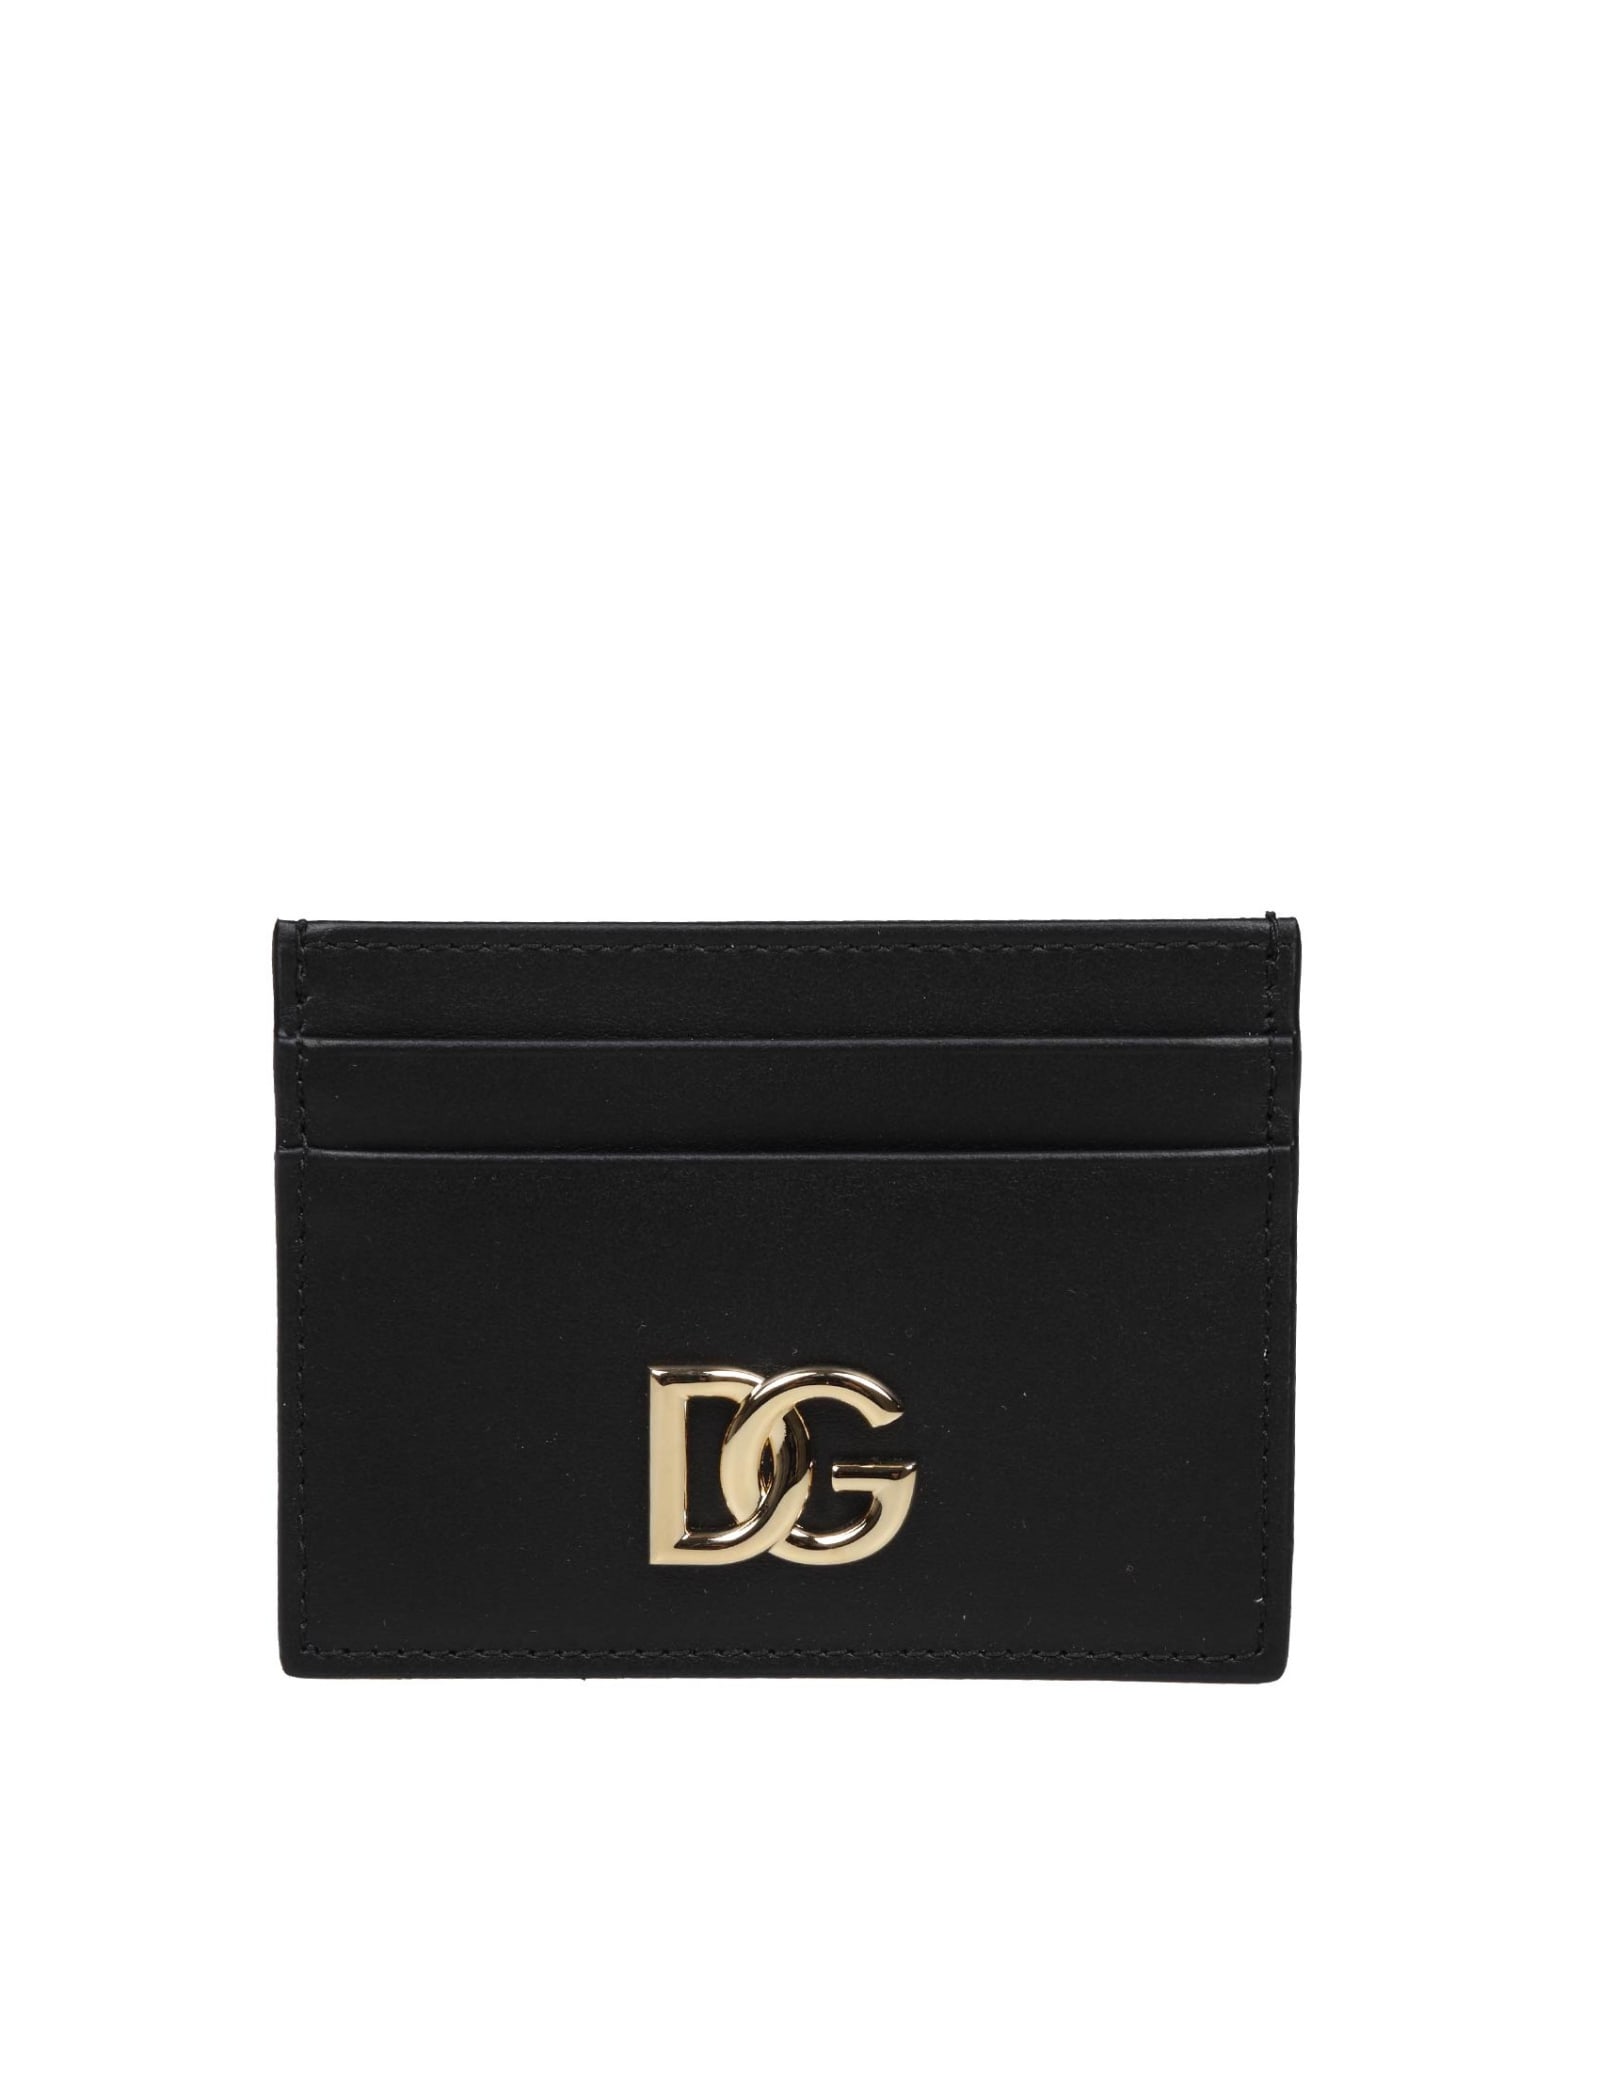 DOLCE & GABBANA CARD HOLDER IN LEATHER WITH DG LOGO